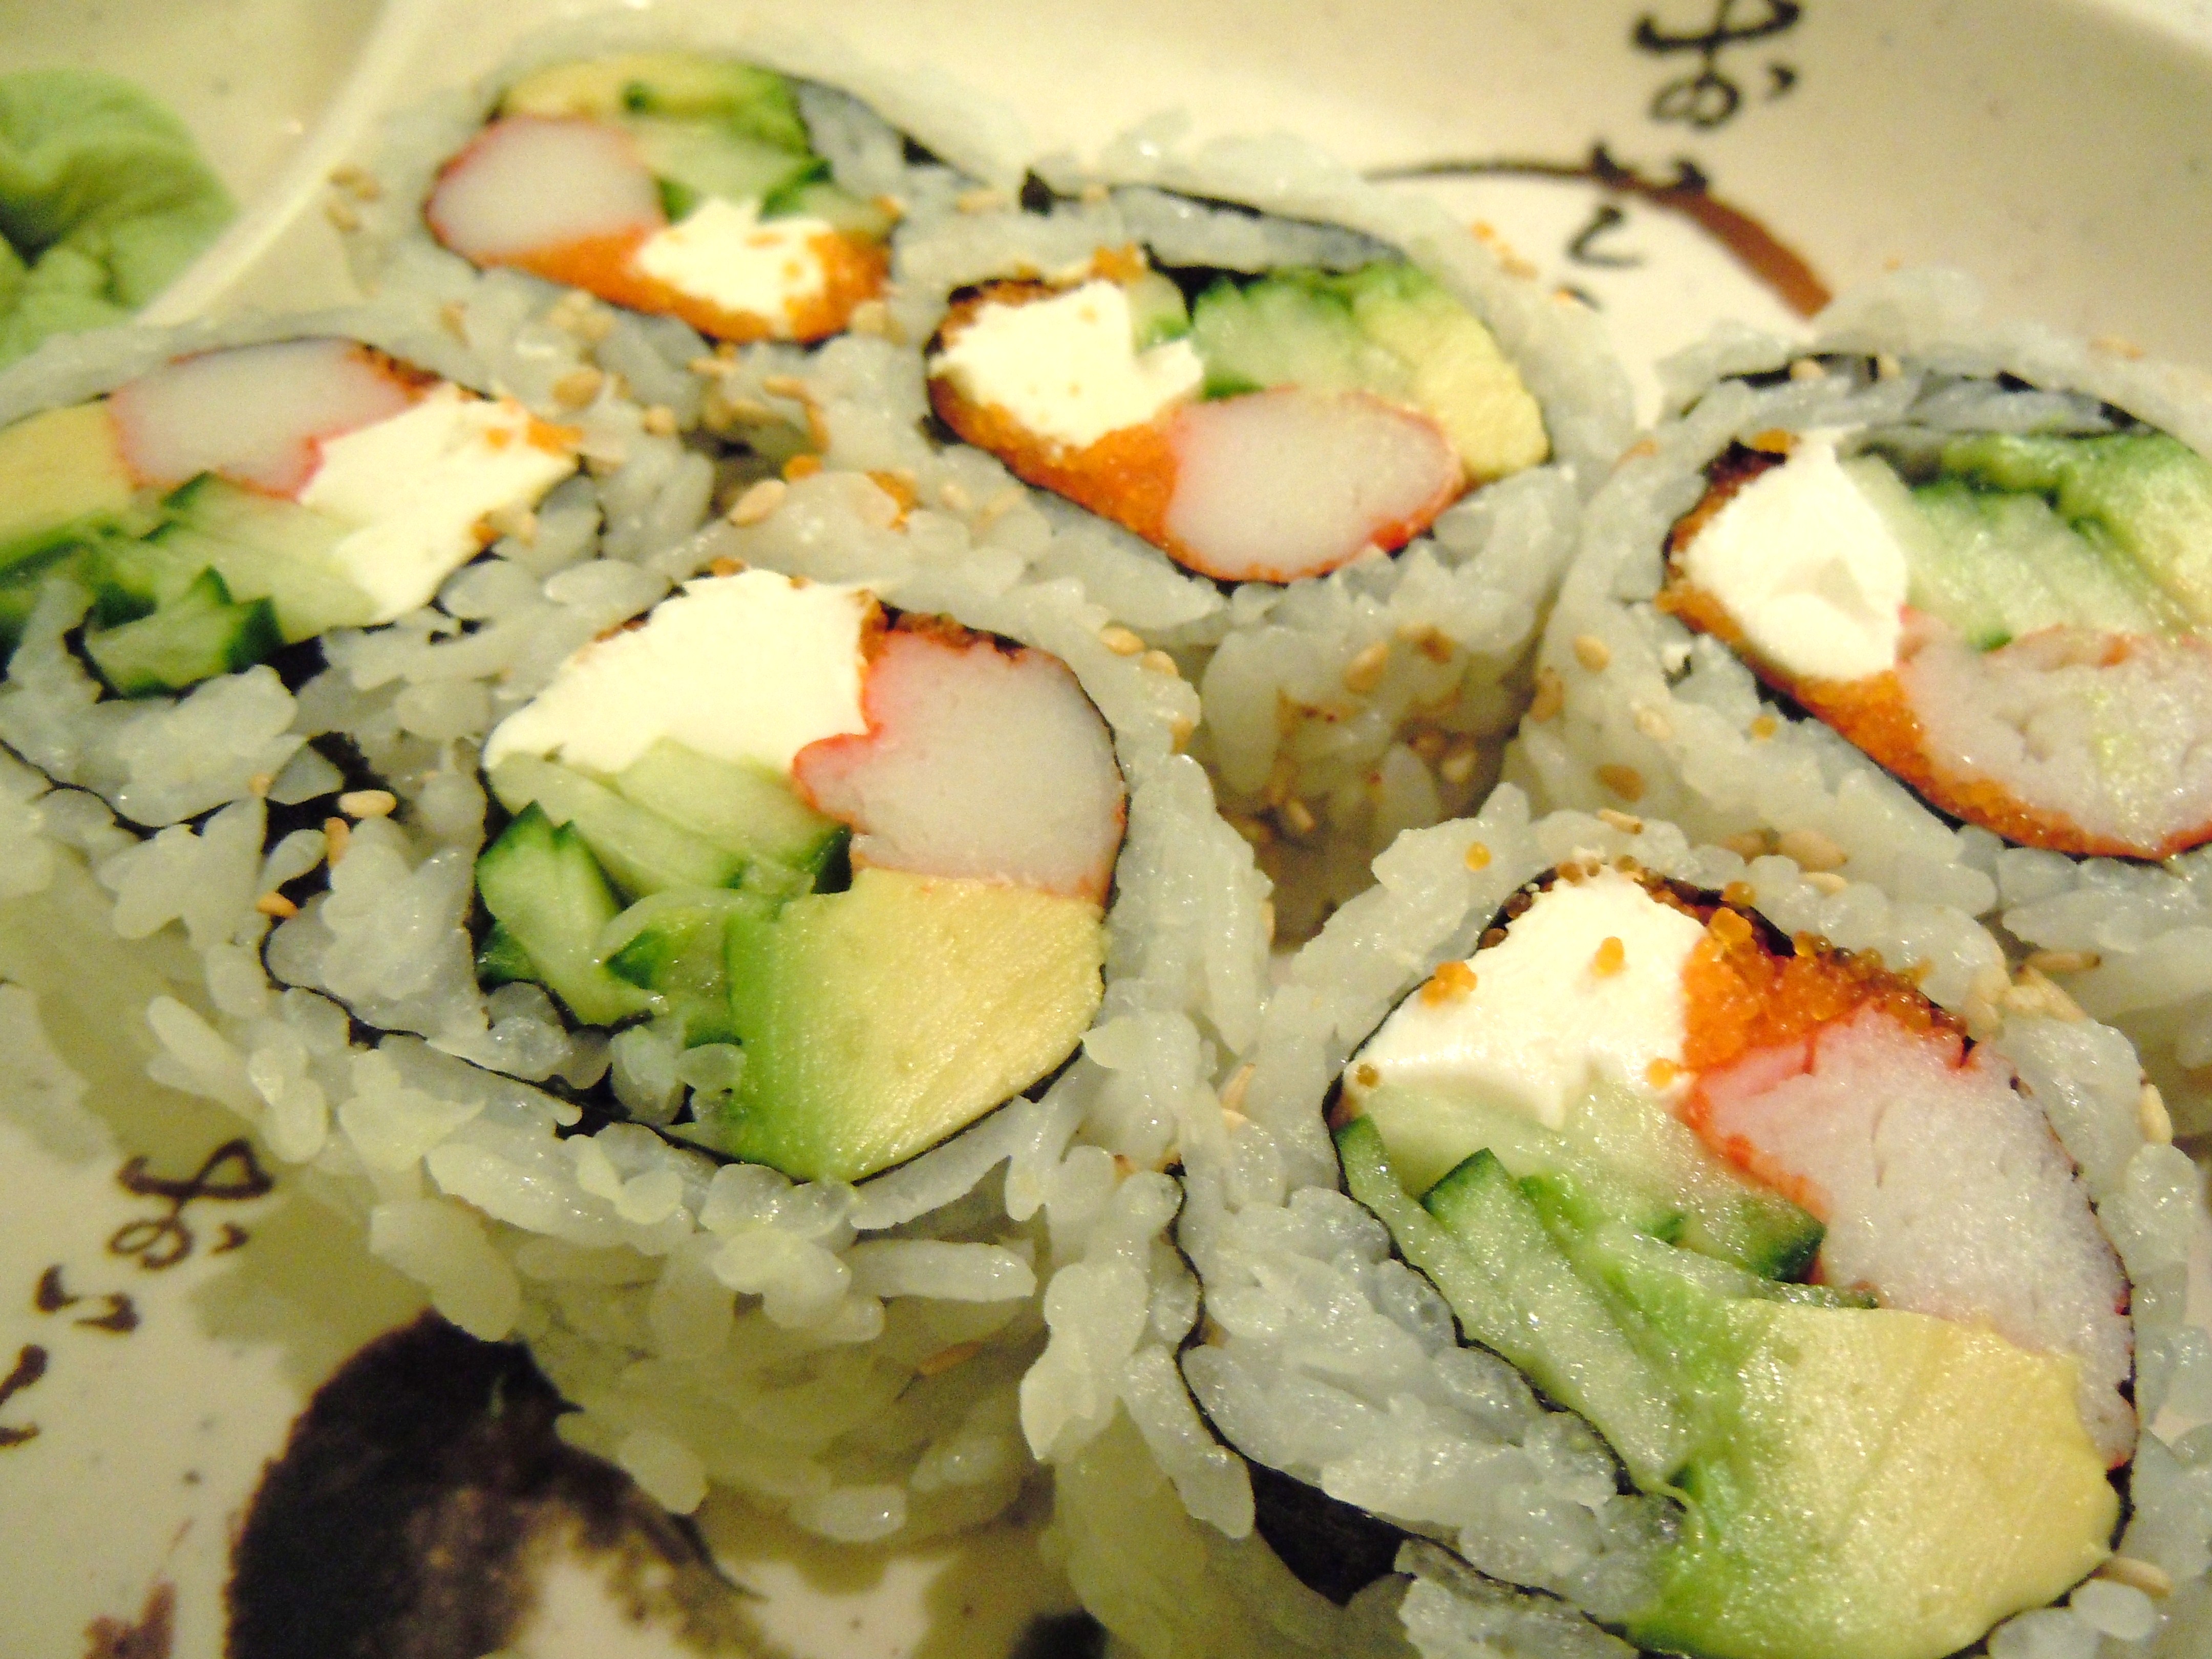 Big Sushi Pizzas and Philadelphia Rolls at Big Sushi! | Ate by Ate